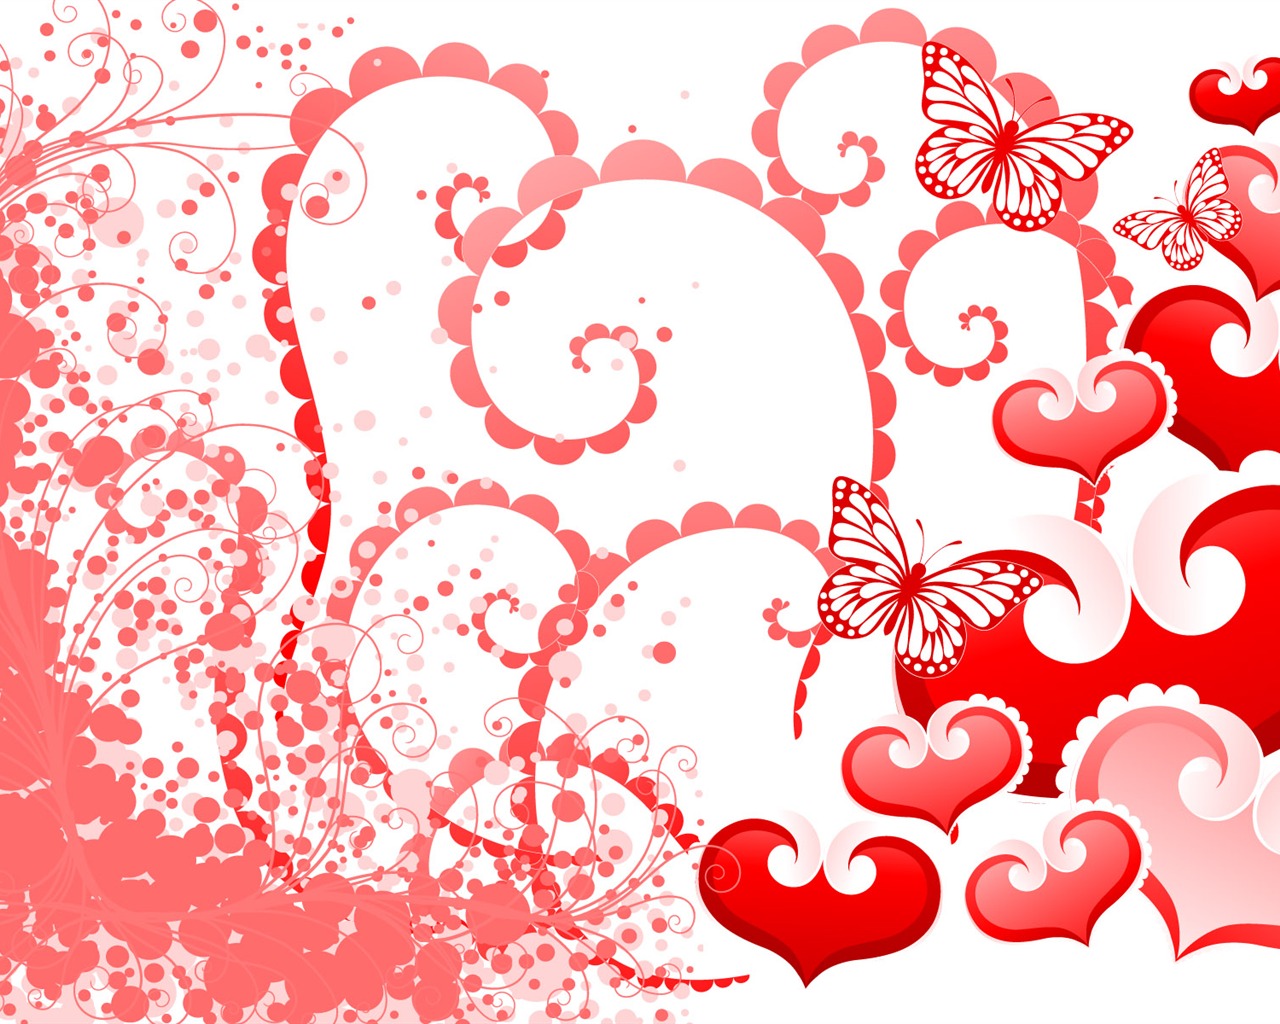 Valentine's Day Theme Wallpapers (6) #6 - 1280x1024